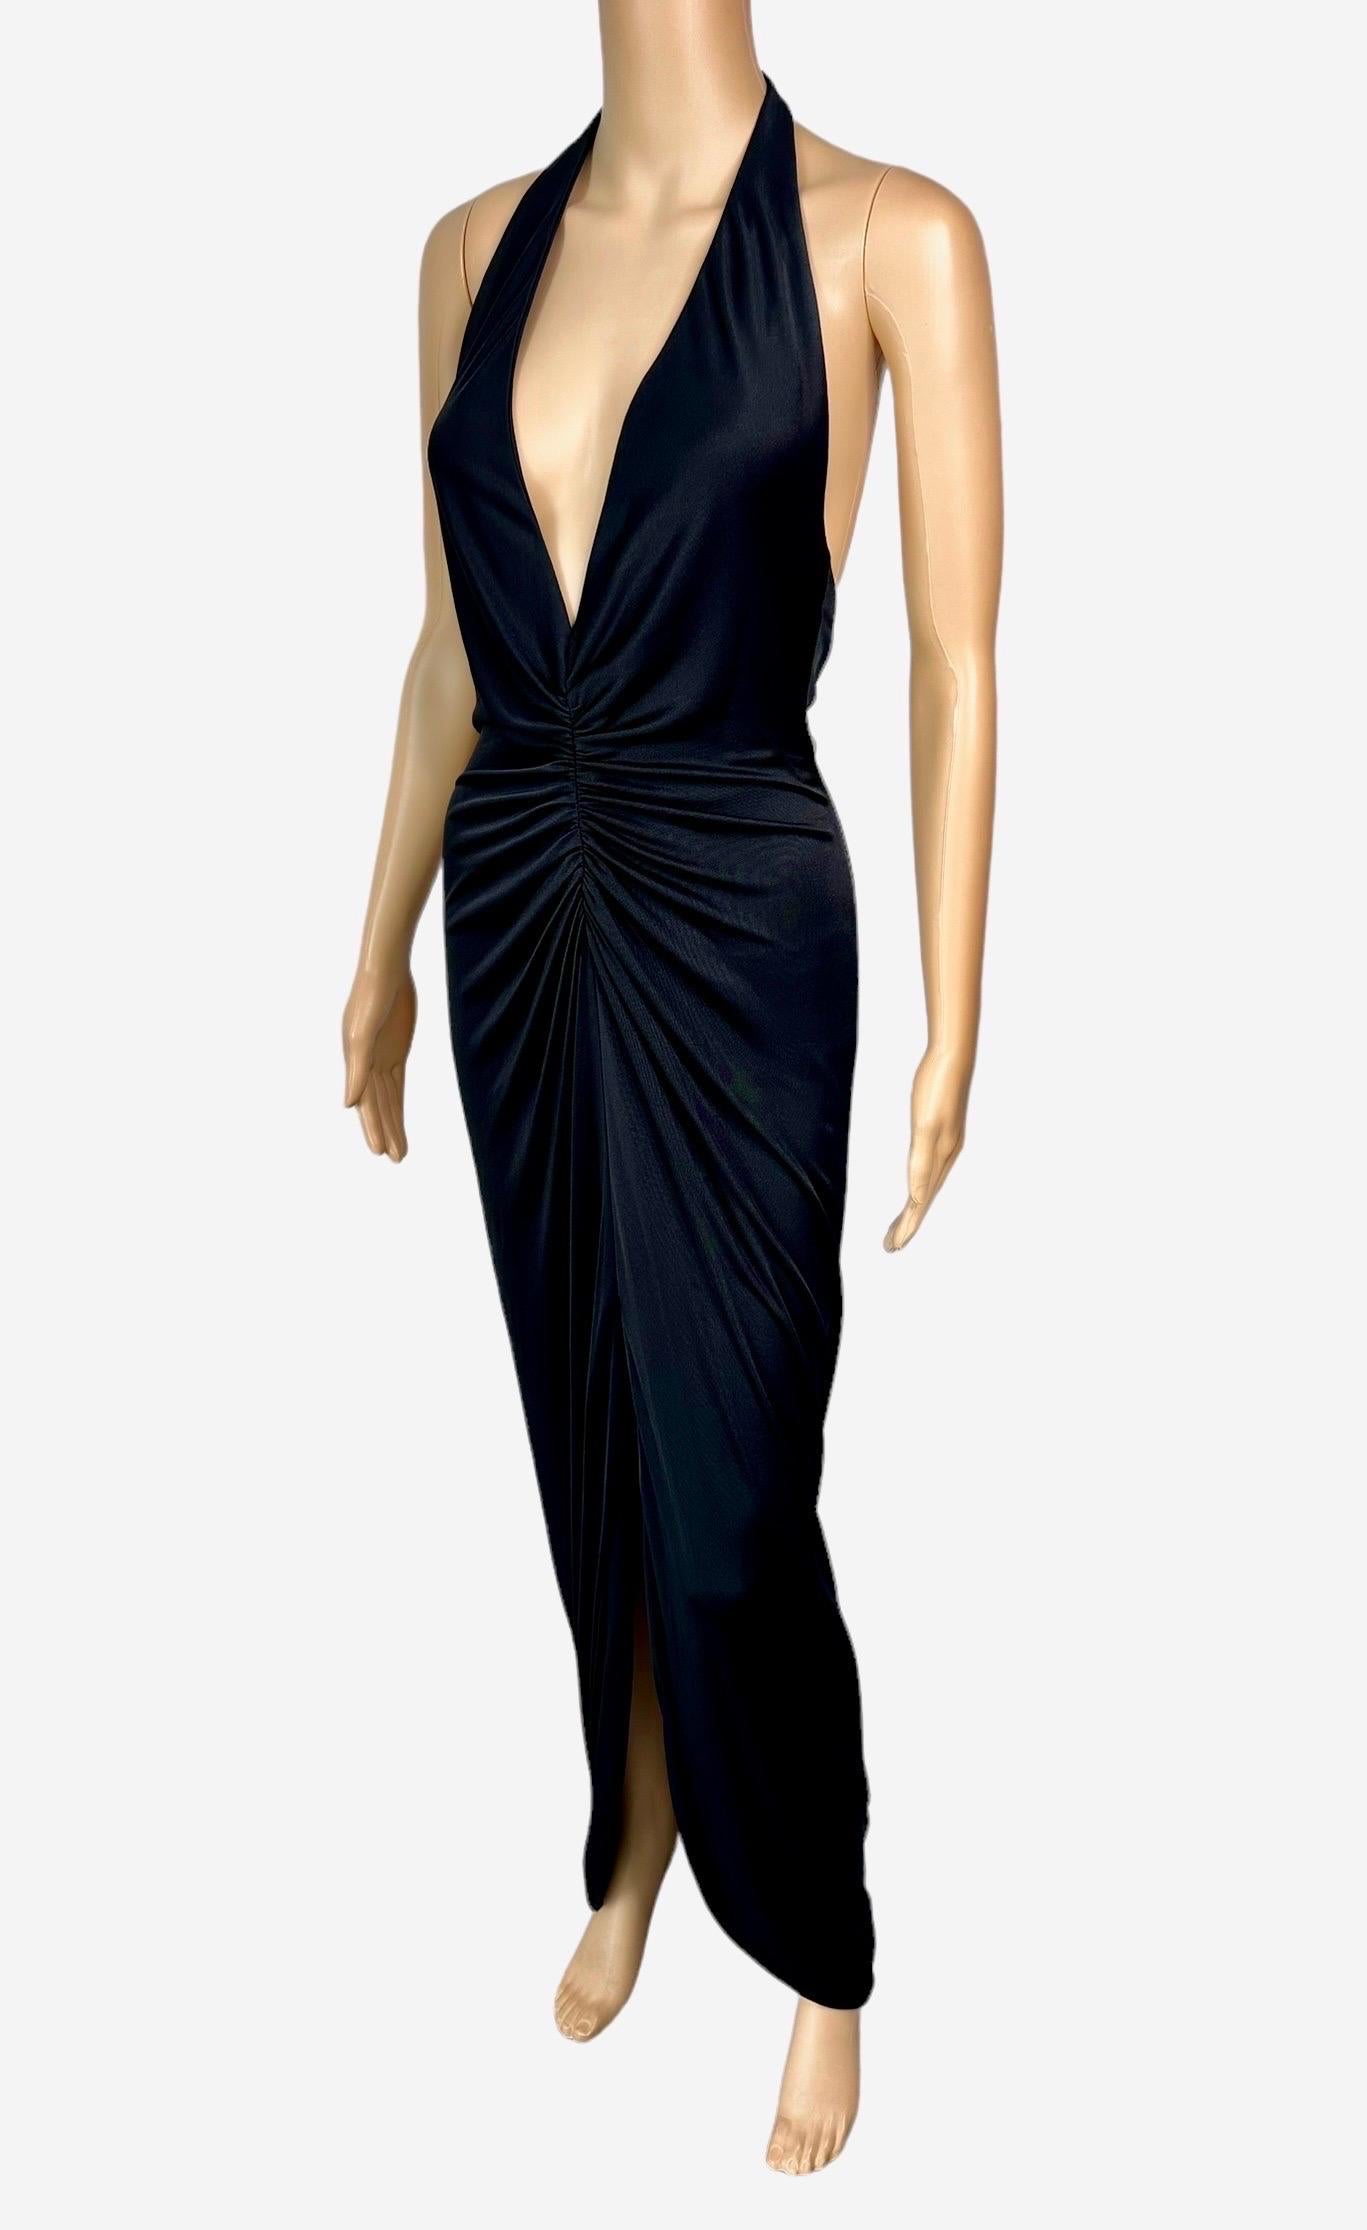 Versace S/S 2005 Runway Plunging Hi-Low Ruched Open Back Evening Dress Gown IT 42

Look  49 from the Spring 2005 Collection (in another color)

